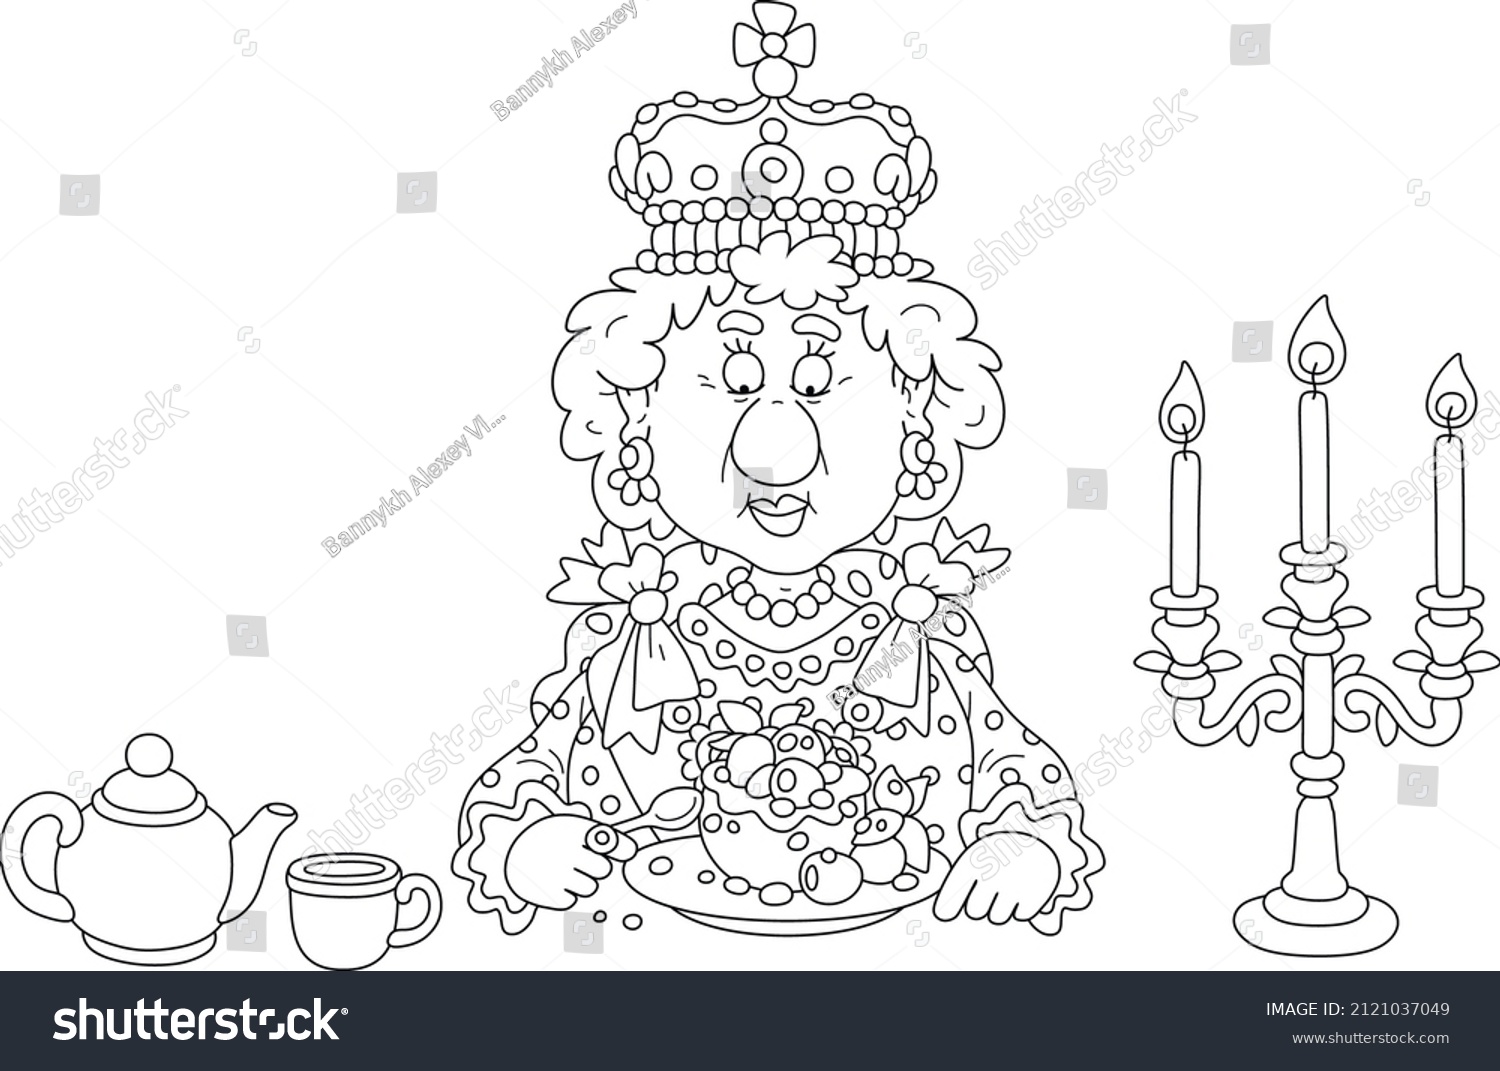 SVG of Queen in a crown and in a solemn royal dress sitting at her festive table with a traditional fresh and tasty British Yorkshire pudding with berries, black and white vector cartoon illustration svg